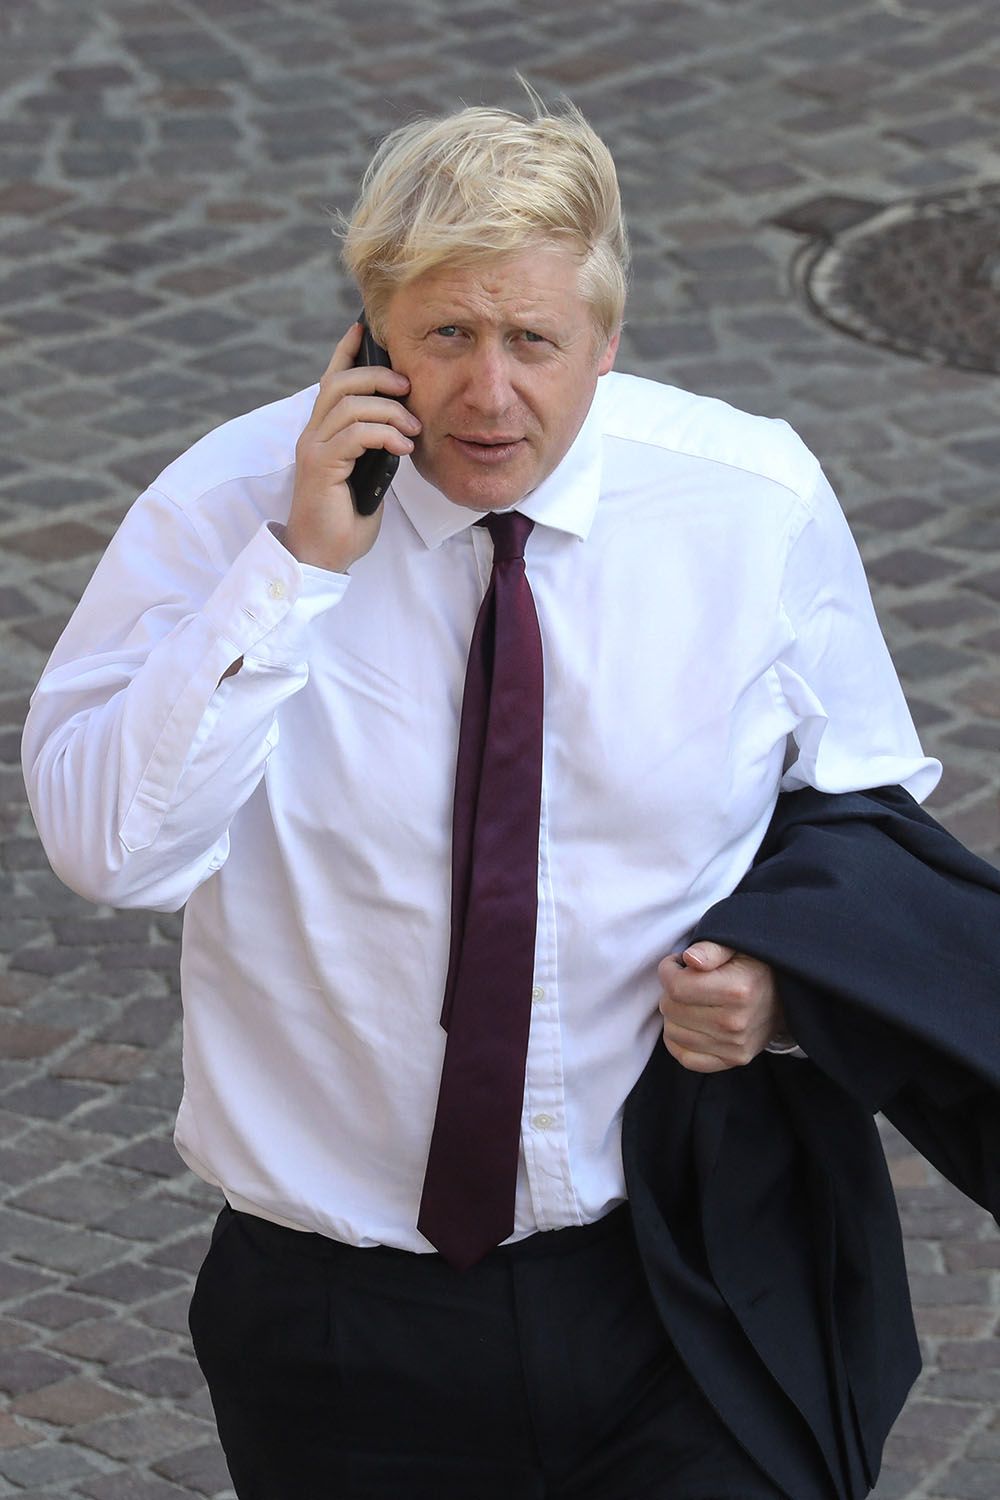 Britain's Prime Minister Boris Johnson speaks on his moble as he walks close to the sea front in Biarritz, south-west France on August 25, 2019, on the second day of the annual G7 Summit attended by the leaders of the world's seven richest democracies, Britain, Canada, France, Germany, Italy, Japan and the United States. (Photo by Ludovic MARIN / AFP)